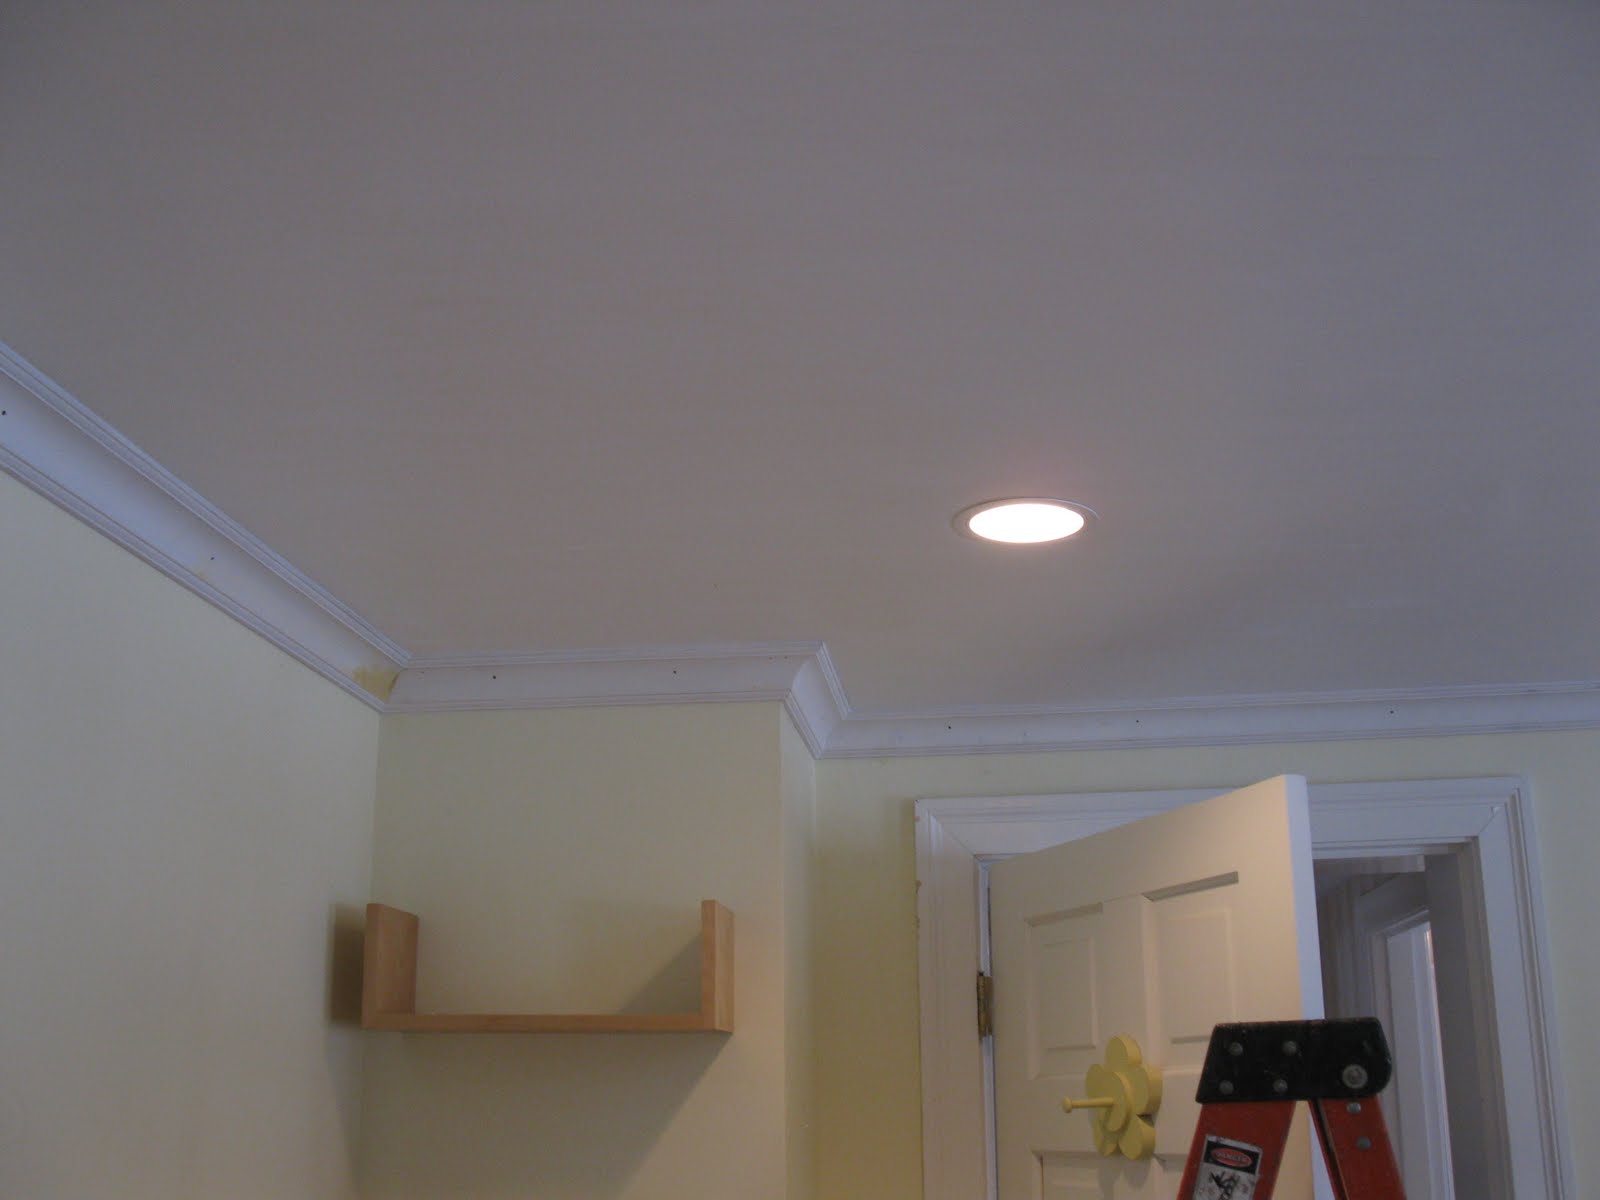 How to Install Speaker Wire Behind Crown Molding - Concord Carpenter